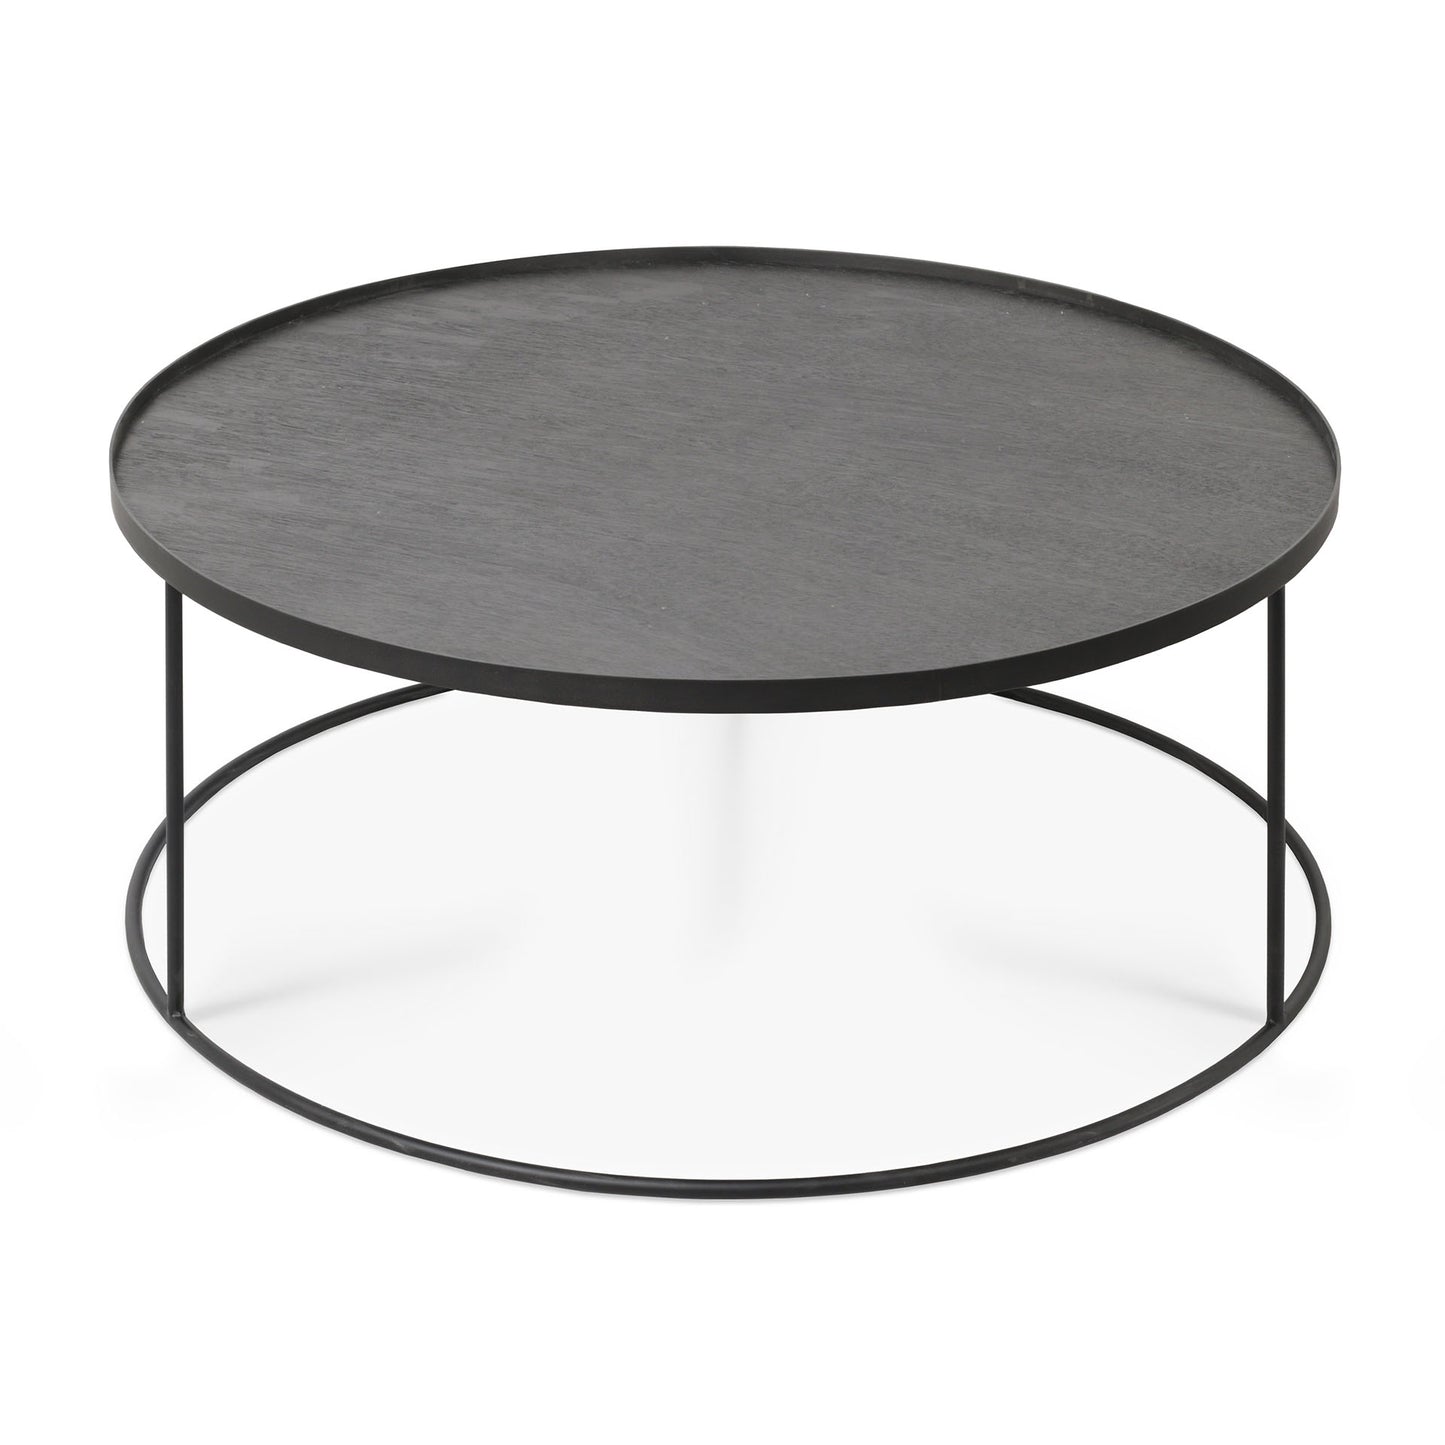 Round tray coffee table (tray not included)